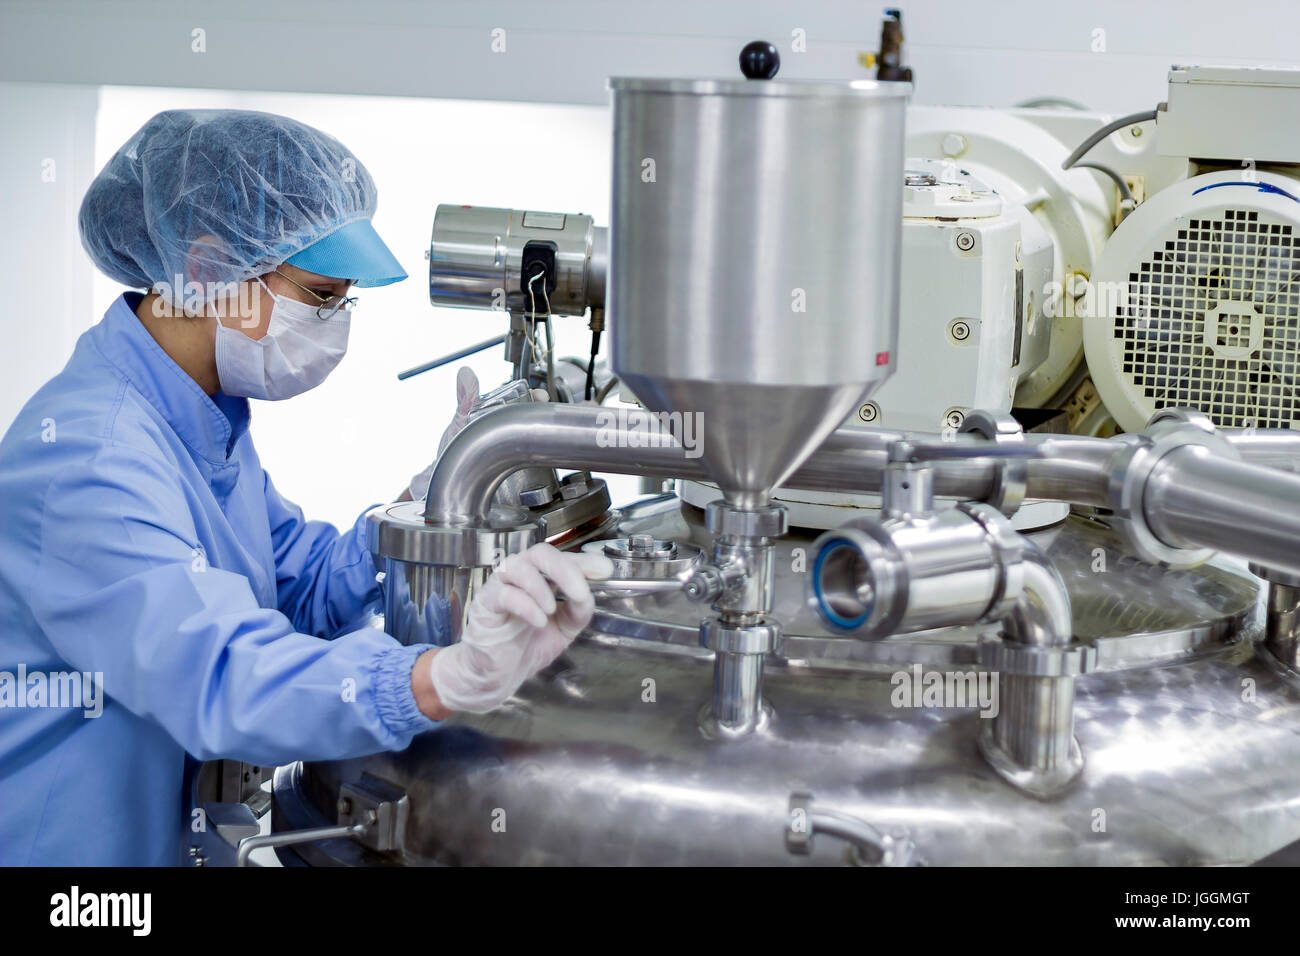 Pharmaceutical technician works in sterile working conditions at pharmaceutical factory. Female worker wearing protective clothing. Stock Photo